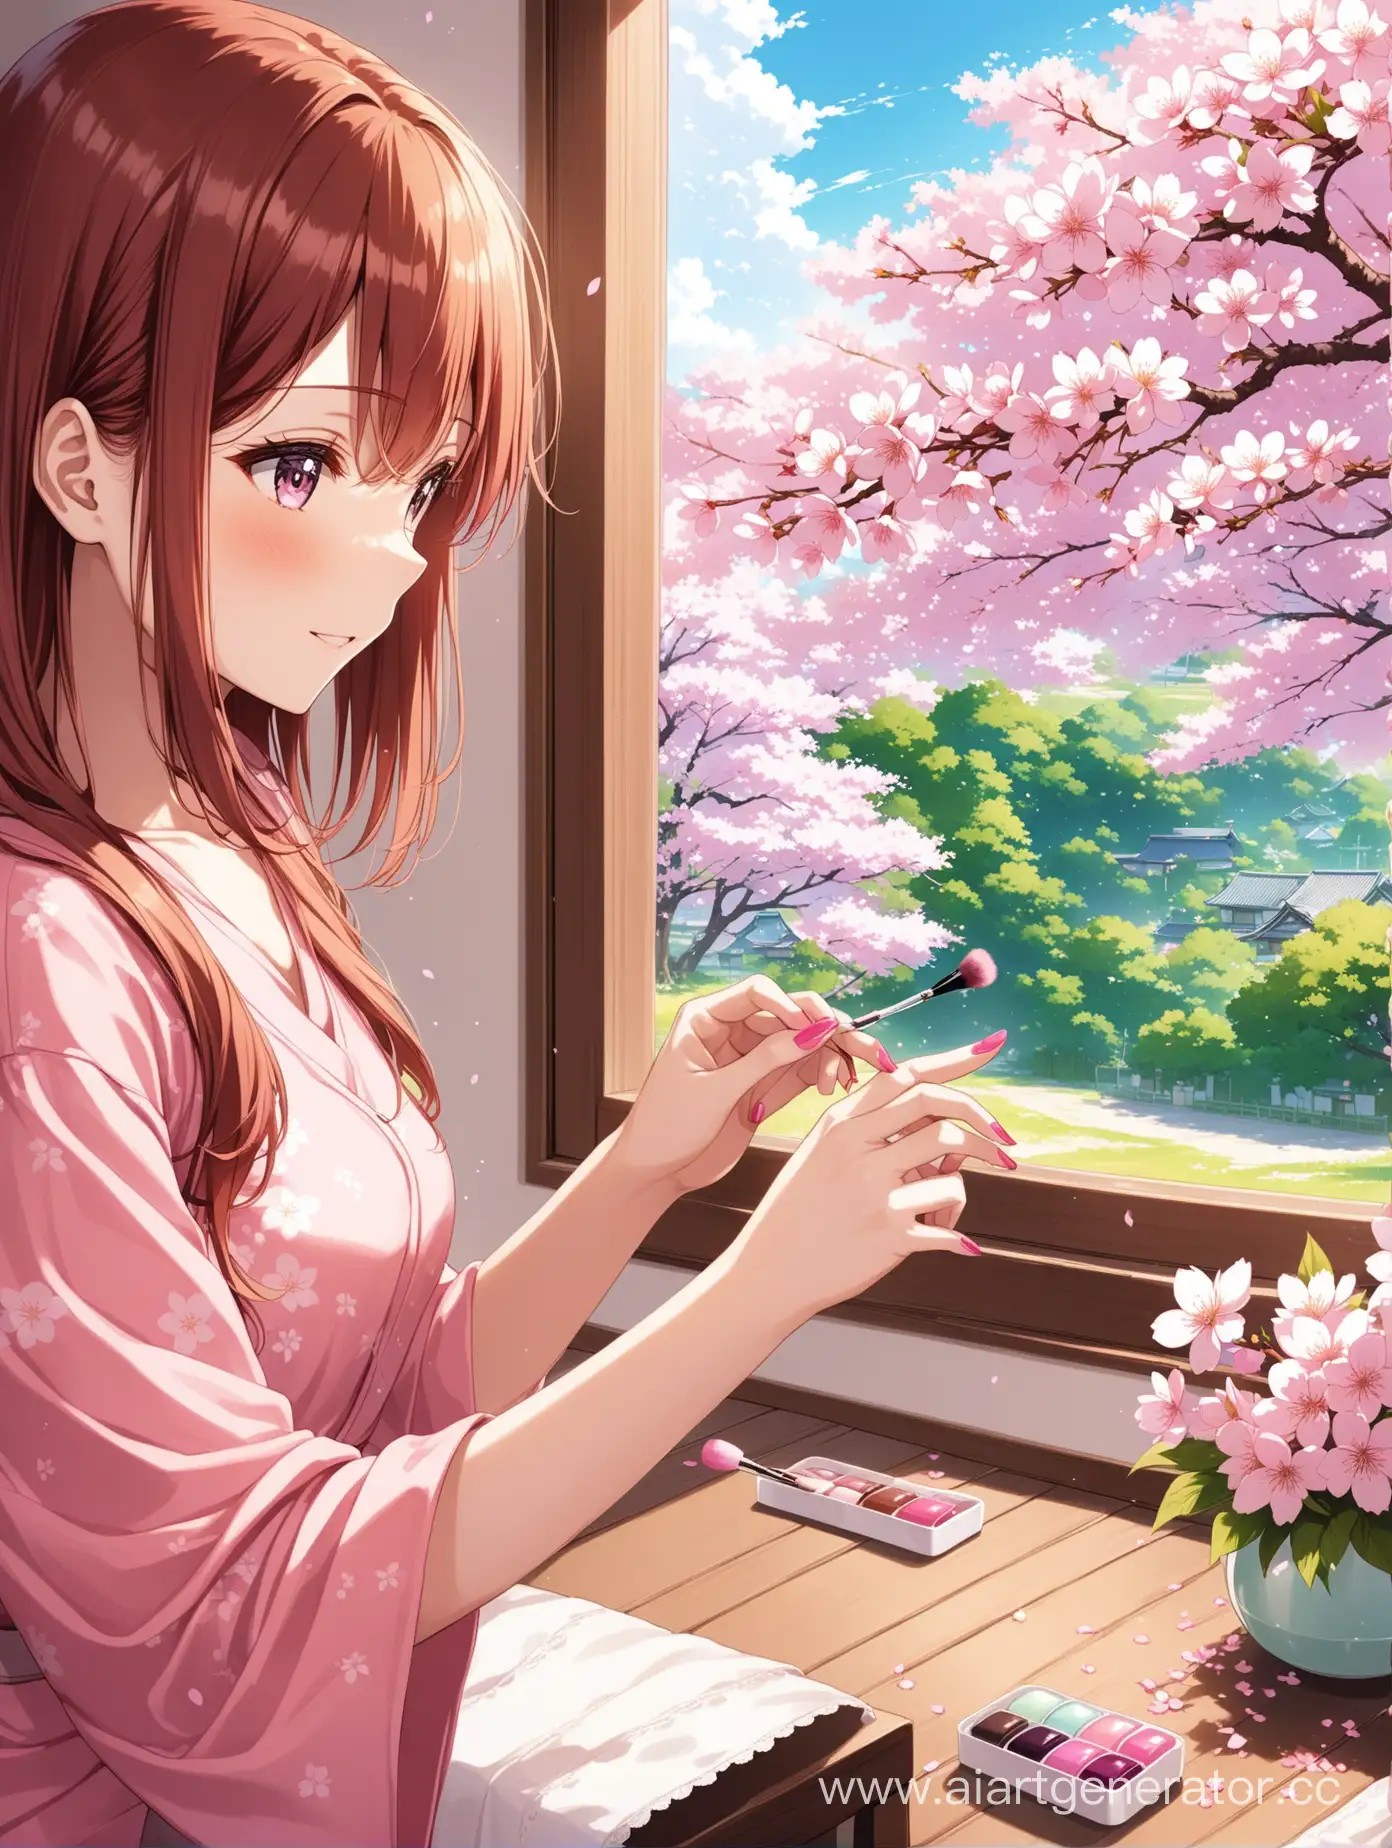 Home-Manicure-Anime-Girl-Beautifying-Another-Amidst-Sakura-Blossoms